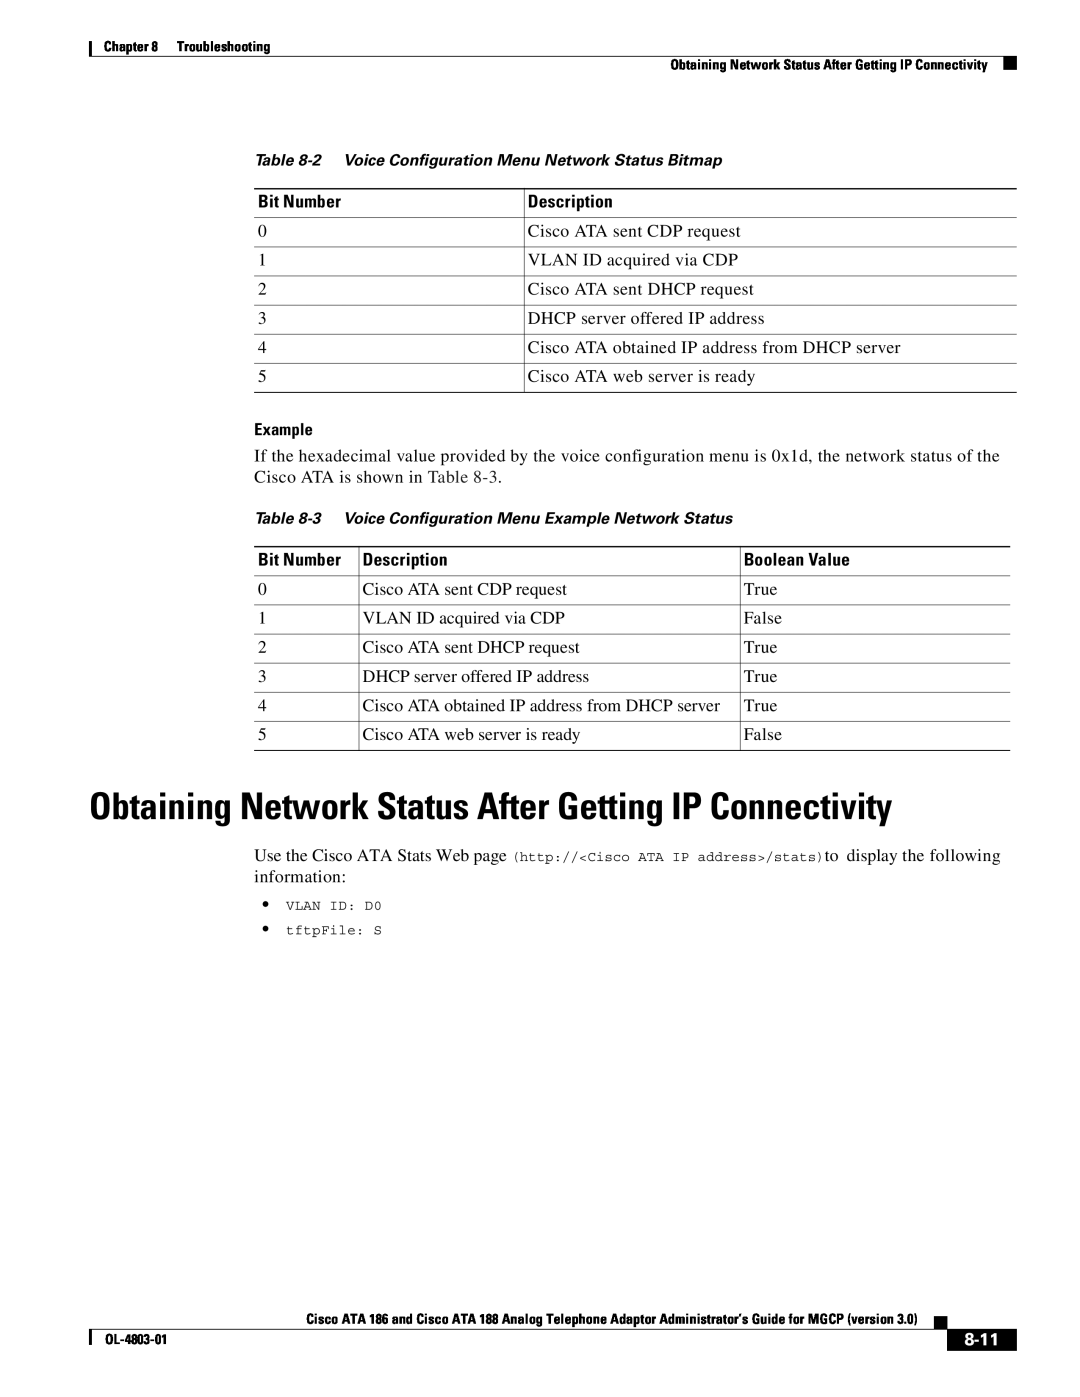 Cisco Systems ATA 186 Obtaining Network Status After Getting IP Connectivity, Boolean Value, 8-11, Bit Number, Description 